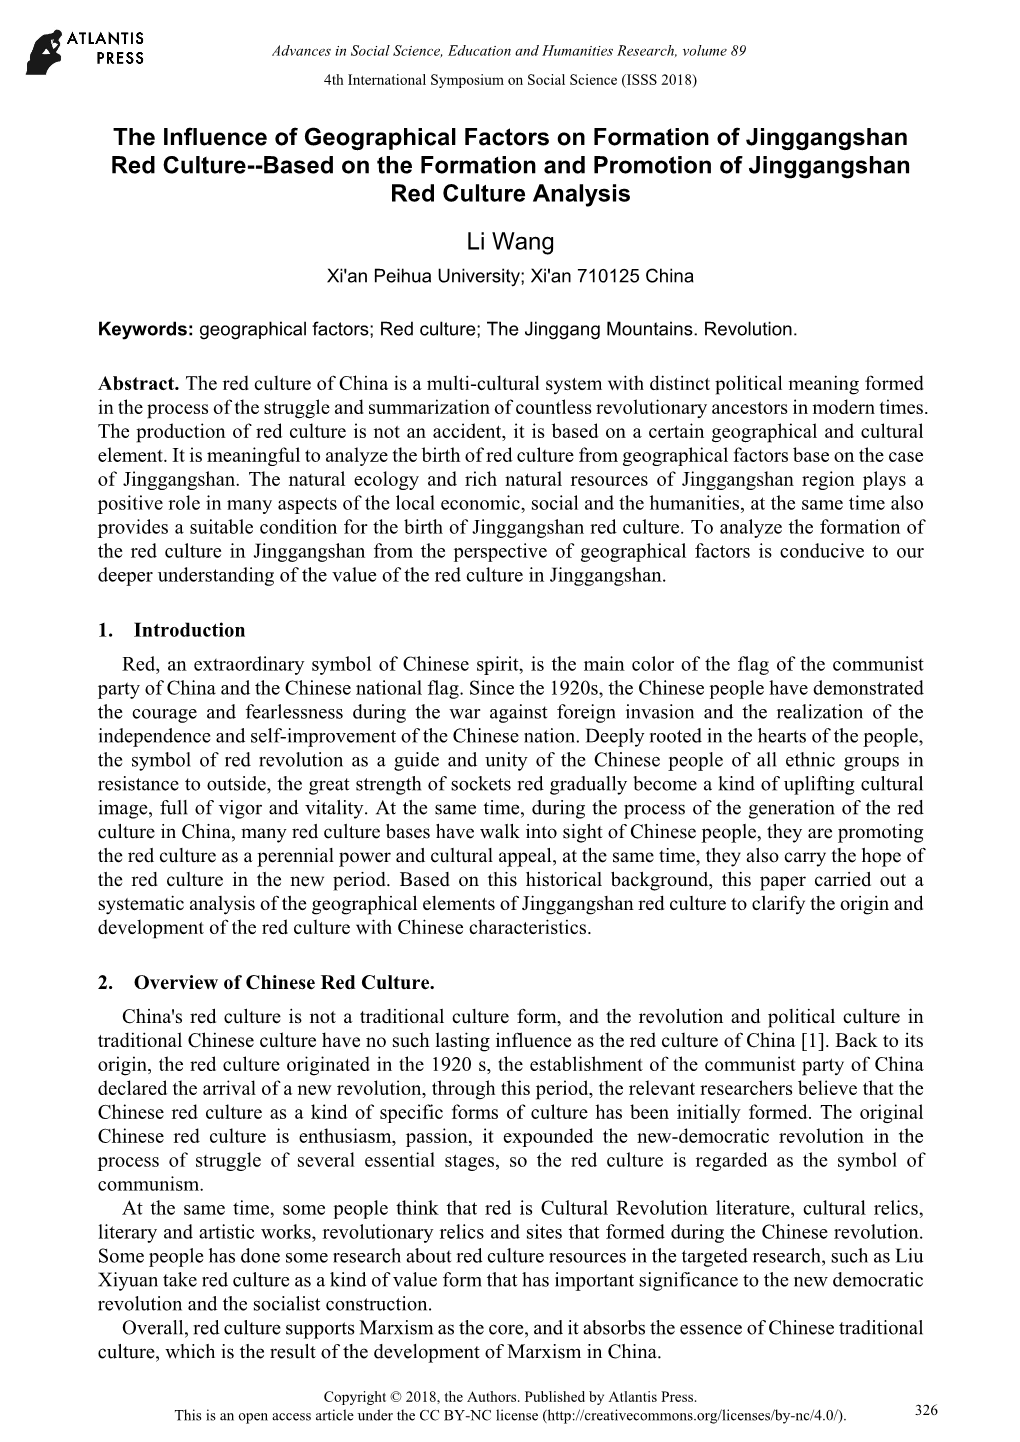 The Influence of Geographical Factors on Formation of Jinggangshan Red Culture--Based on the Formation and Promotion of Jinggangshan Red Culture Analysis